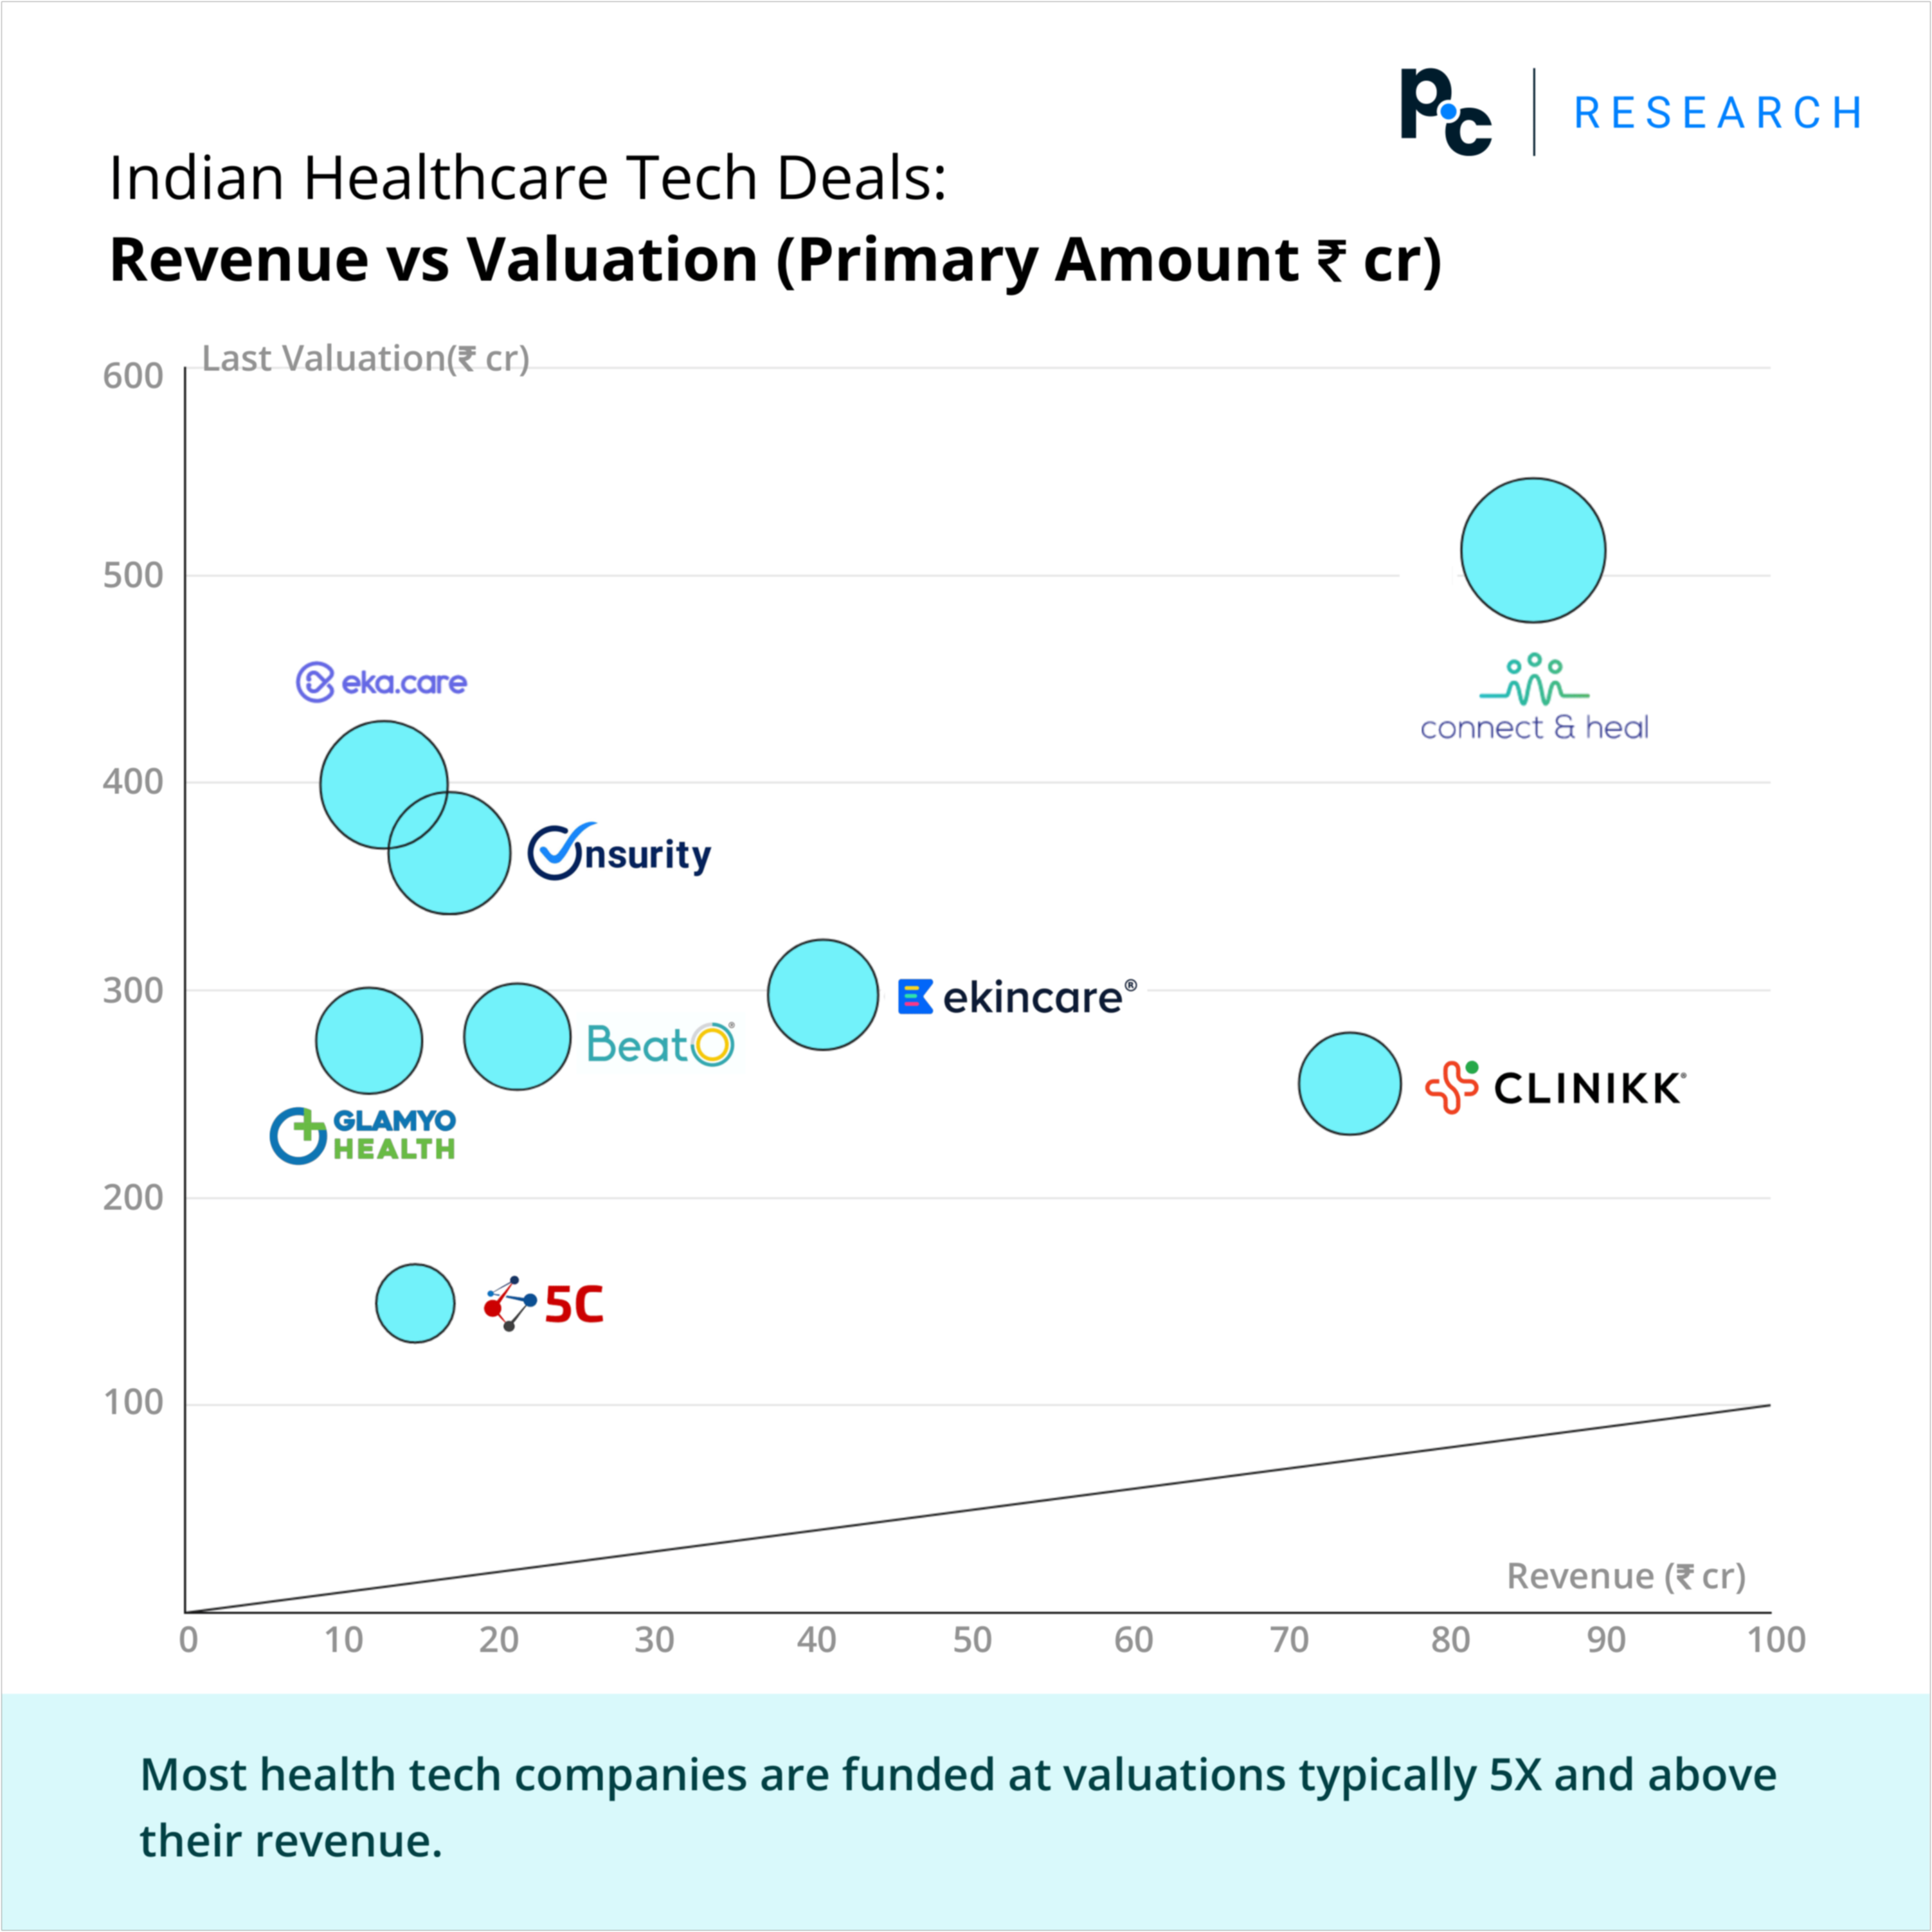 Indian Healthcare Tech Deals: Revenue vs Valuation (Primary Amount ₹ cr).

Most health tech companies are funded at valuations typically 5X and above their revenue.
